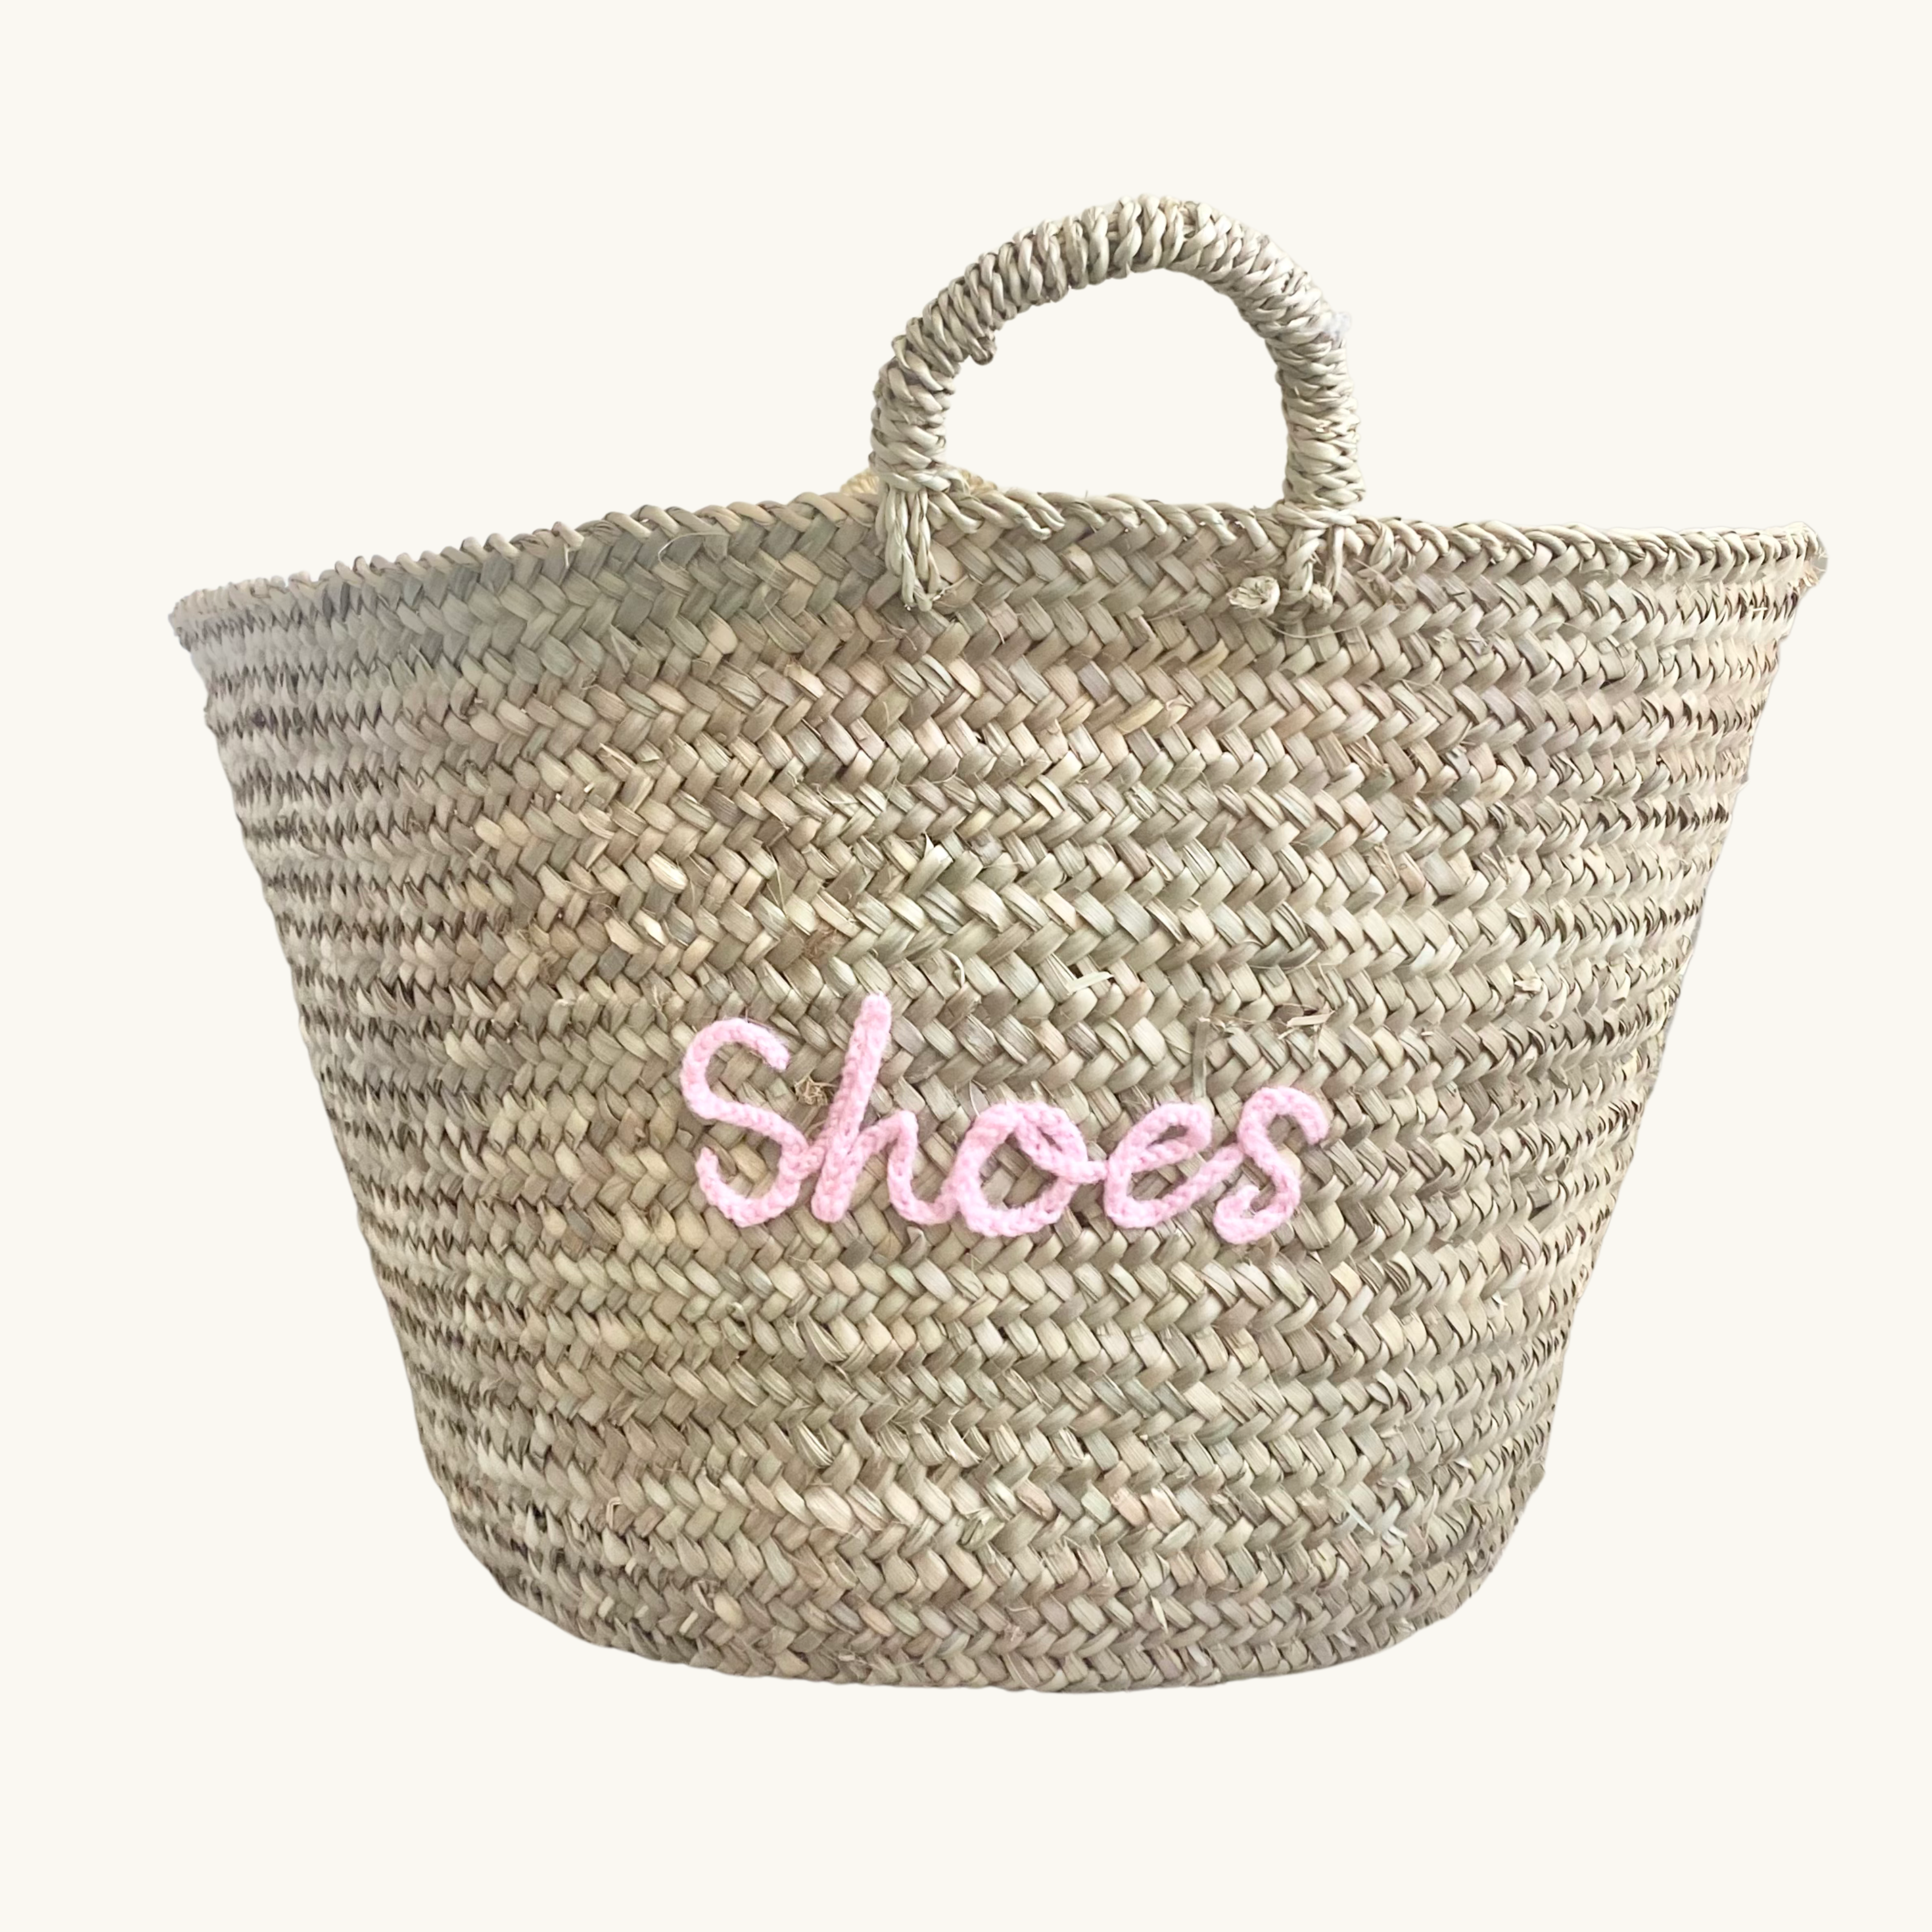 Rustic Round 'Shoes' Basket